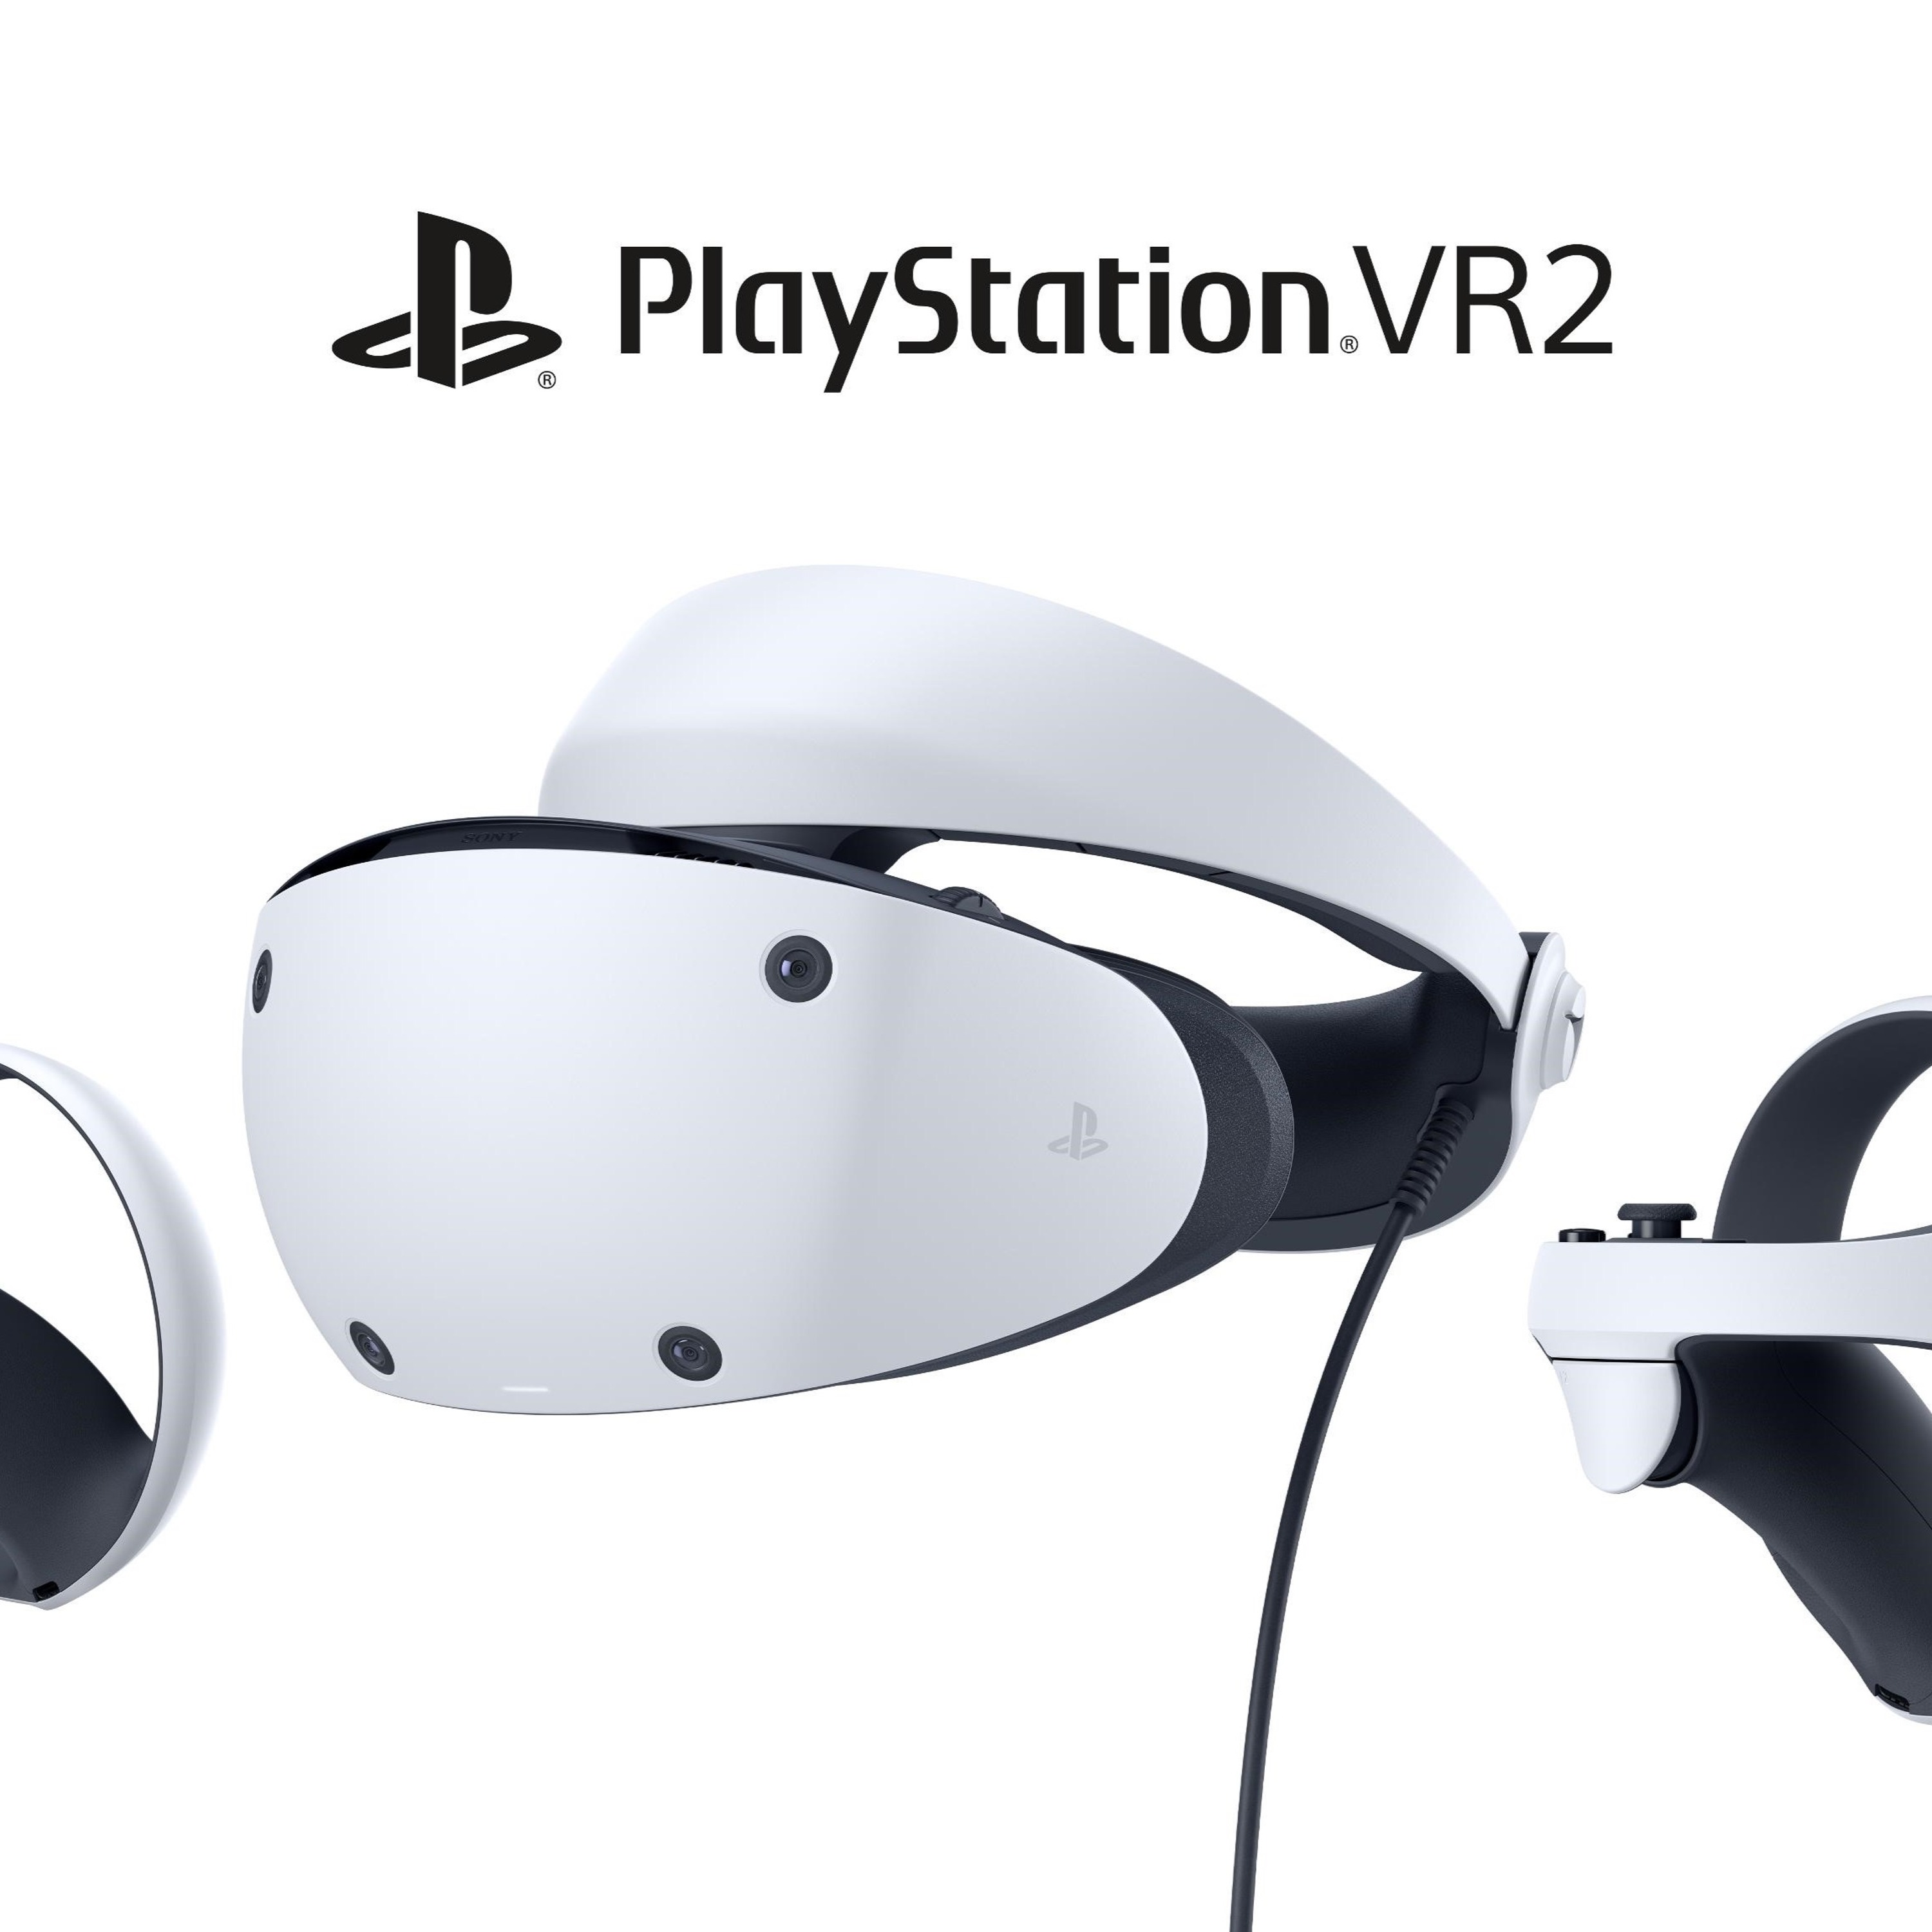 The PSVR 2 headset has been revealed for PS5, Street Fighter 6, PSNow news & more - episode 87